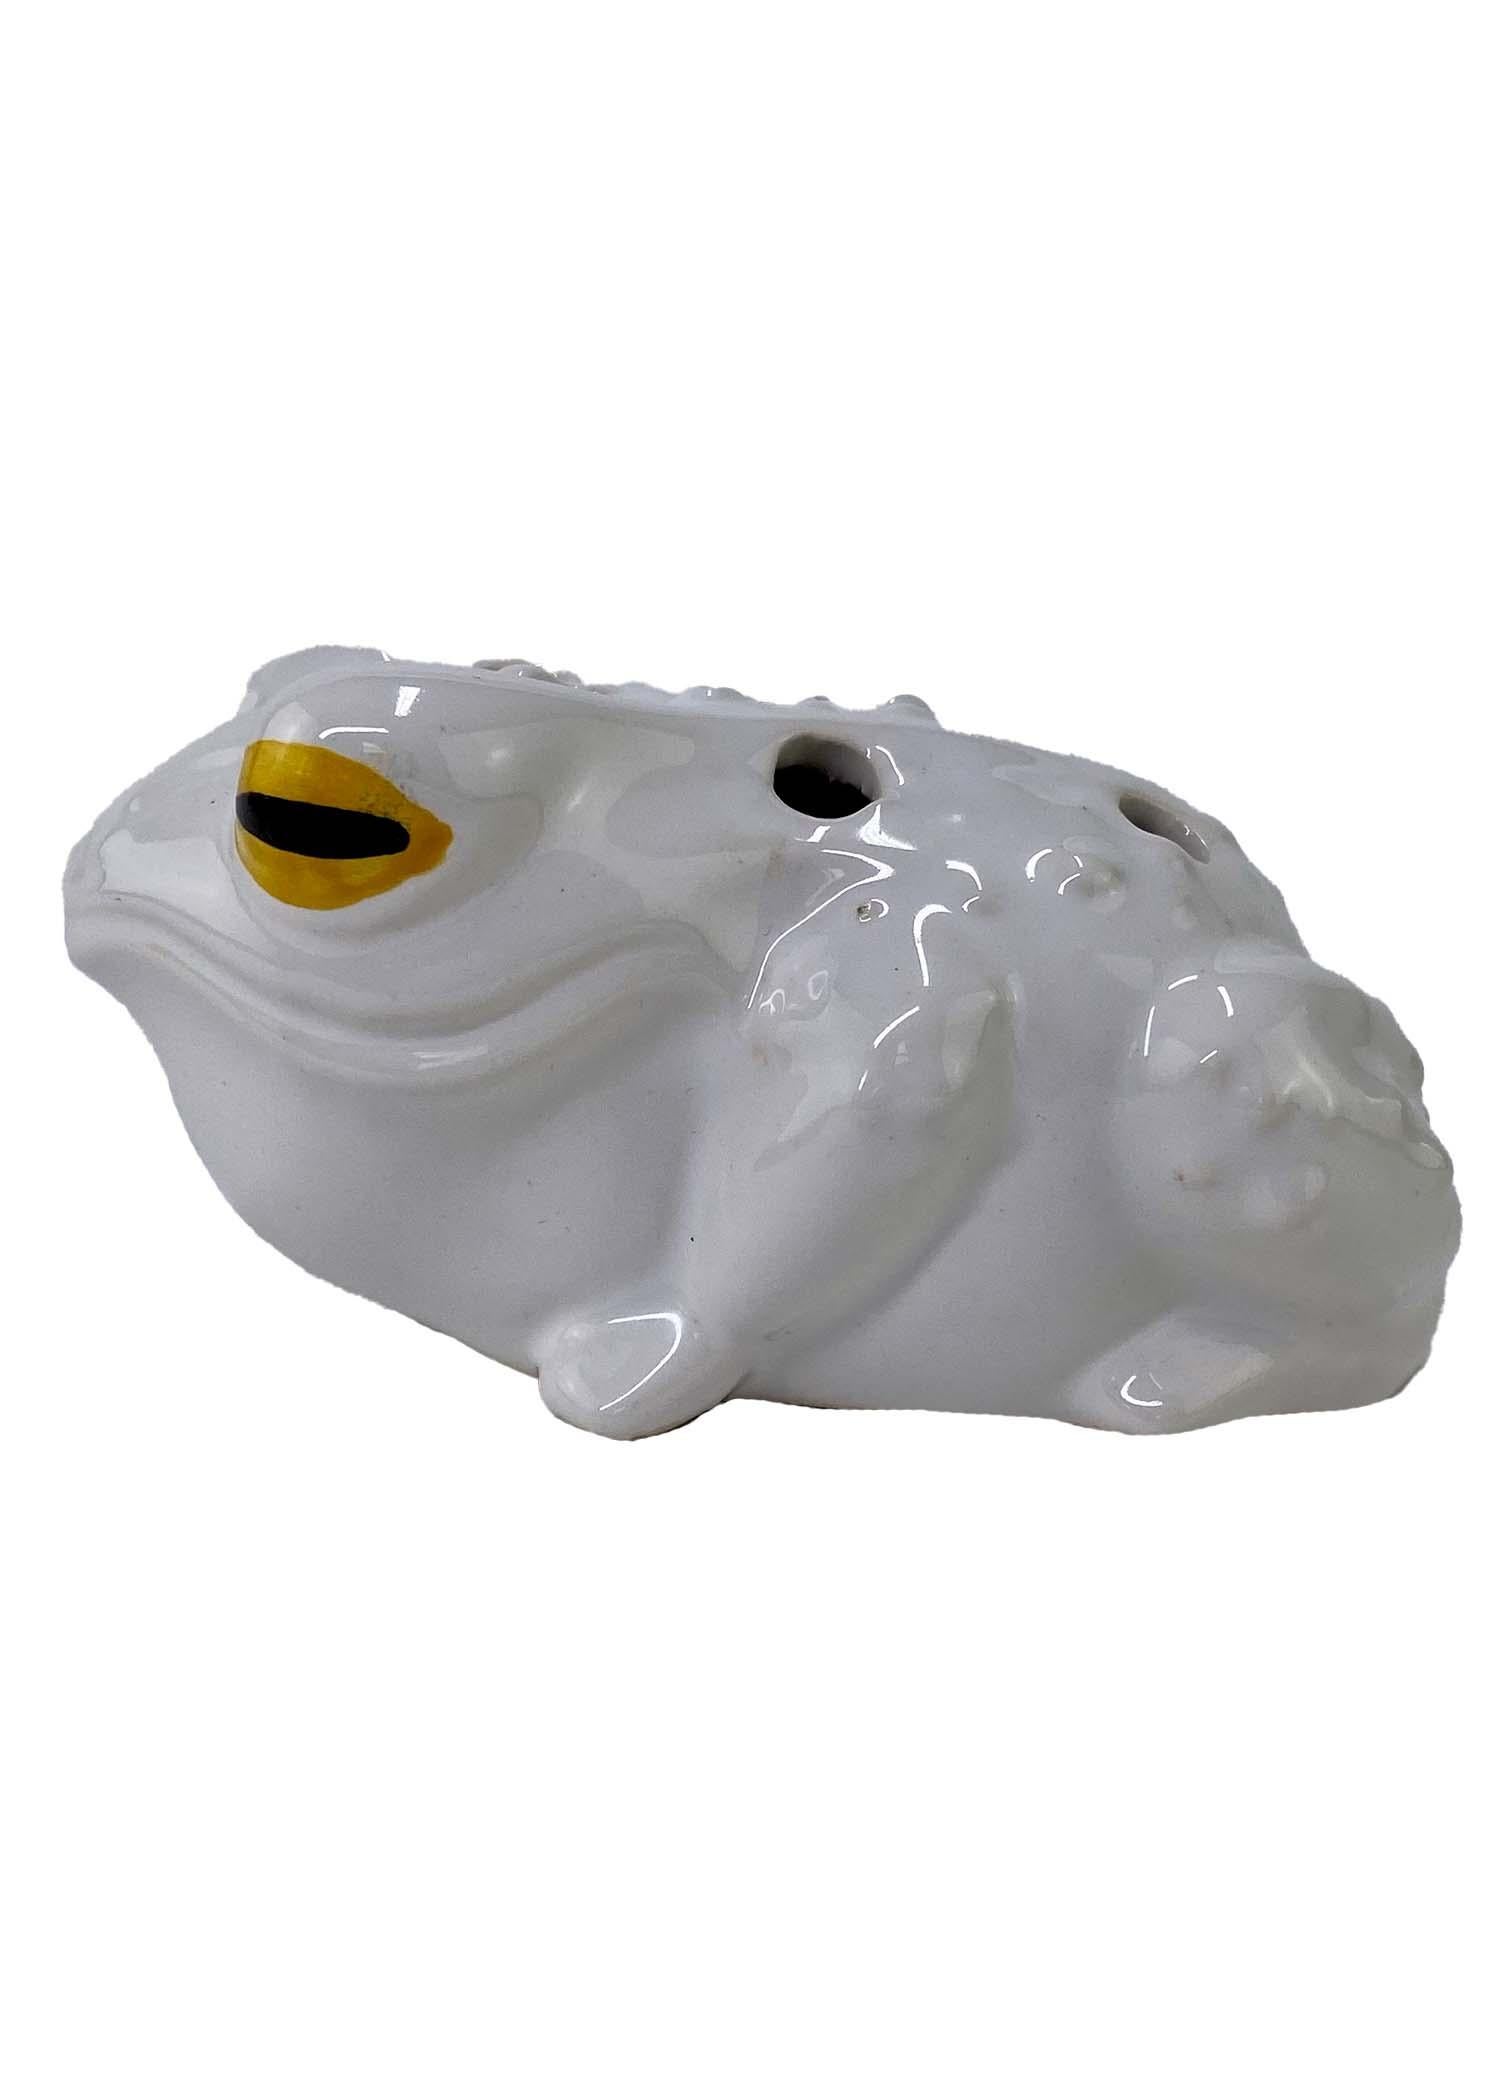 TheRealList presents: a white glazed enamel flower frog by Christian Dior. This piece is a whimsical take on the traditional flower frog form that is sure to be a conversation starter. Though this piece stands out on its own, it can also be used to